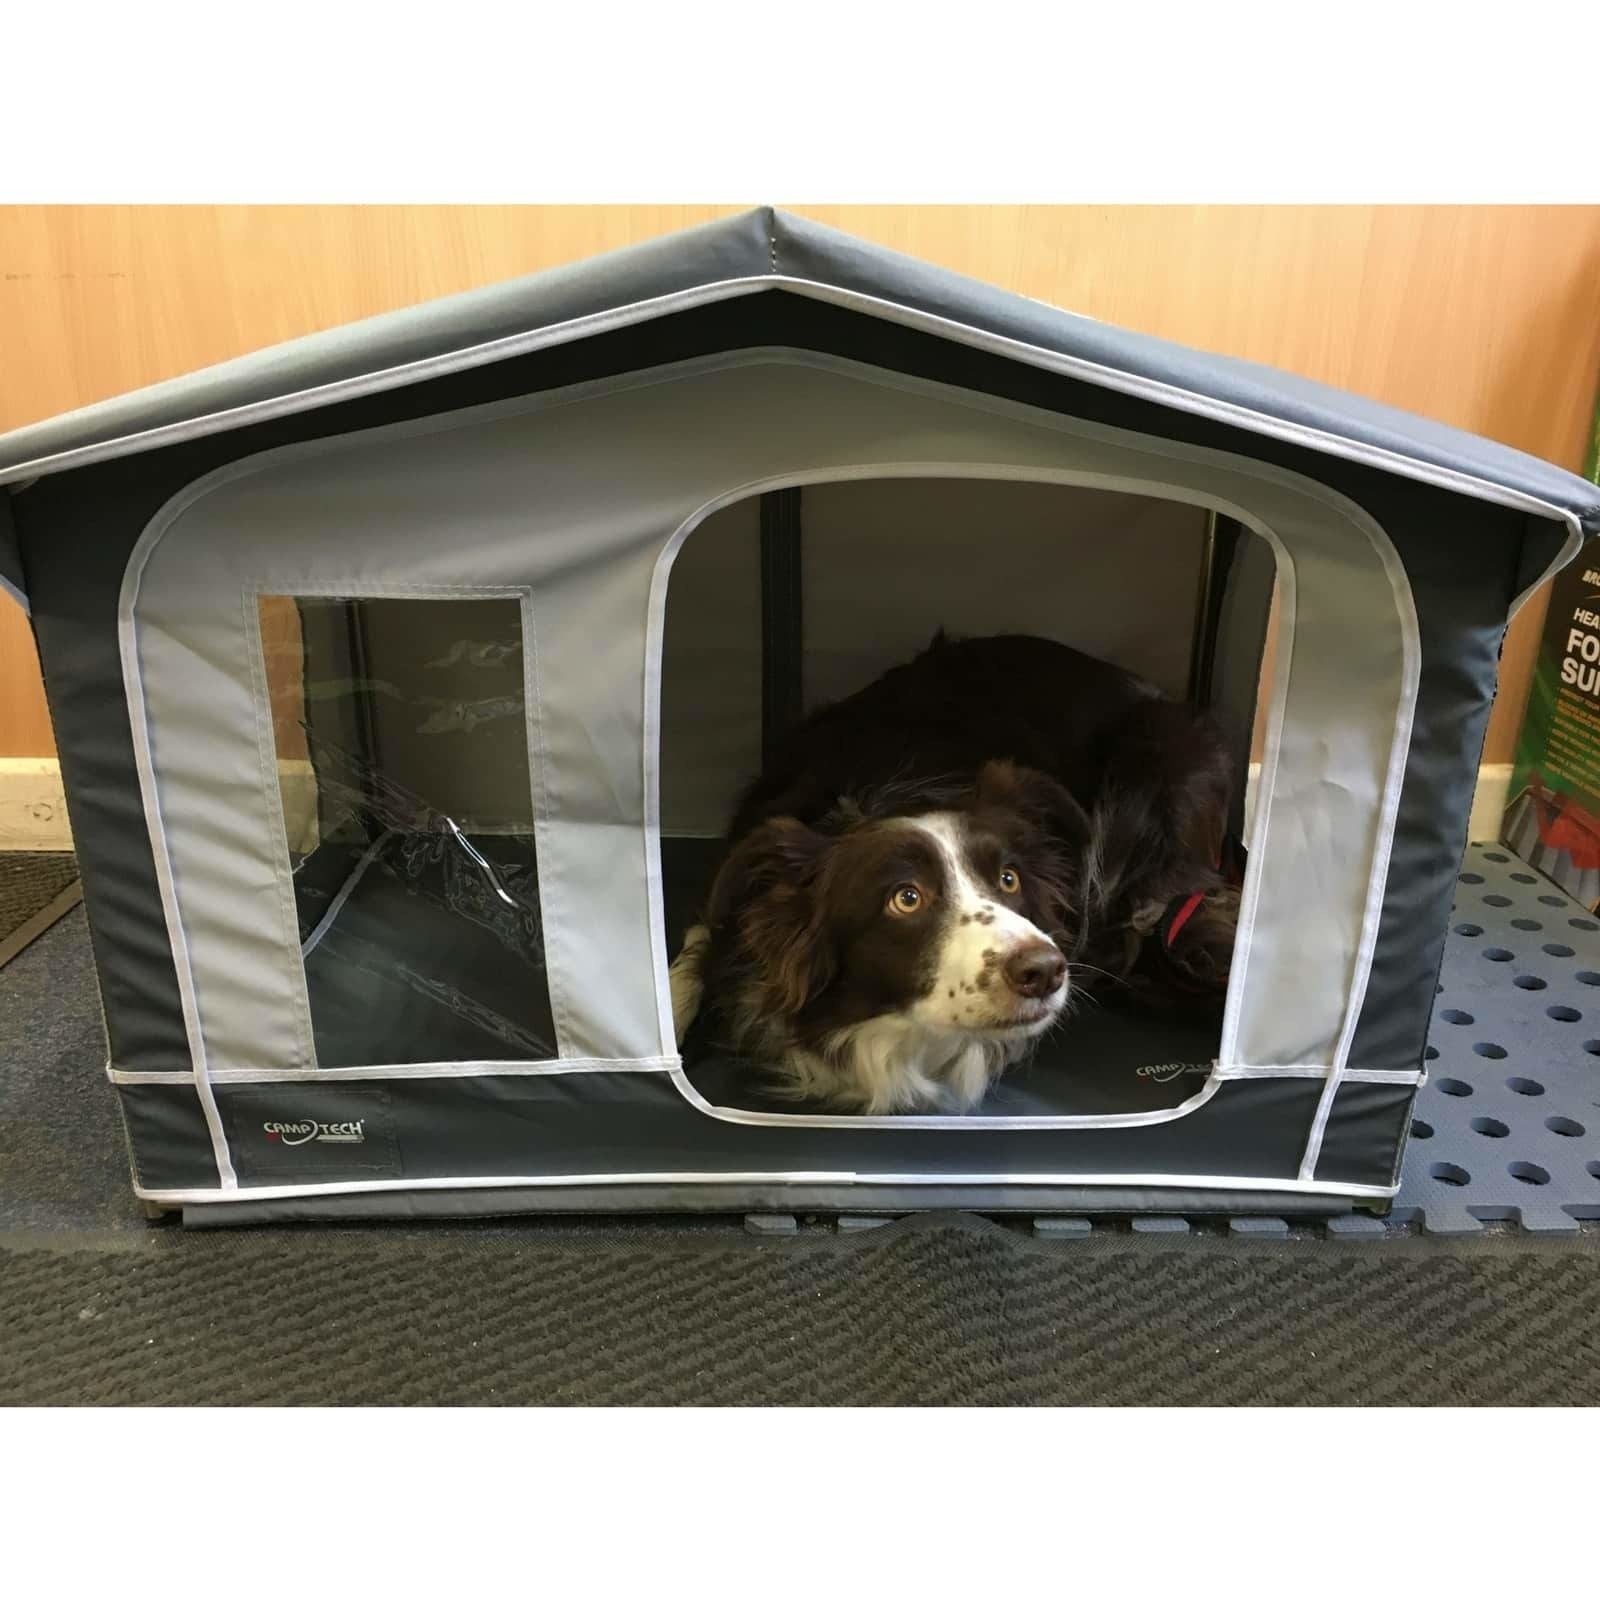 Camptech Pet House - Traditional Mini Awning for Cats & Dogs SL5006 (2019) made by CampTech. A Pet House sold by Quality Caravan Awnings